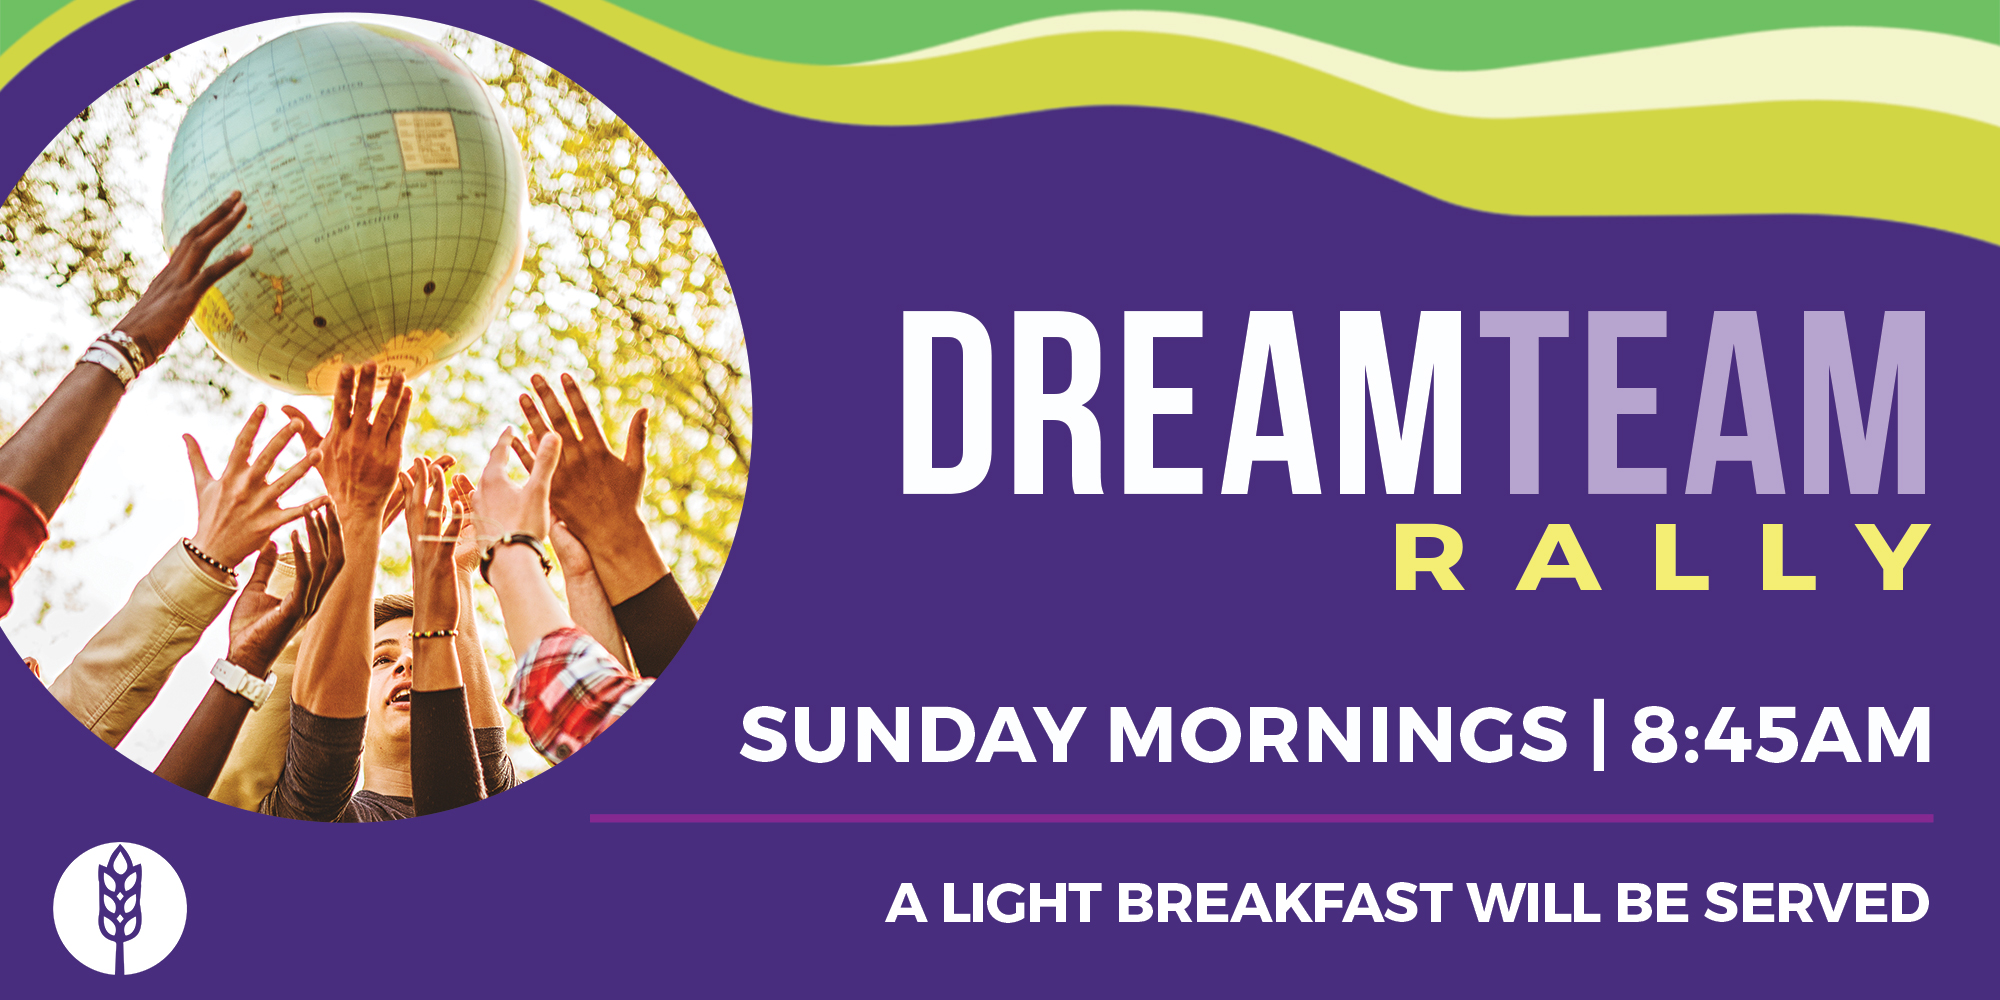 DreamTEAM Rally Sunday Mornings | 8:45am A light breakfast will be served.